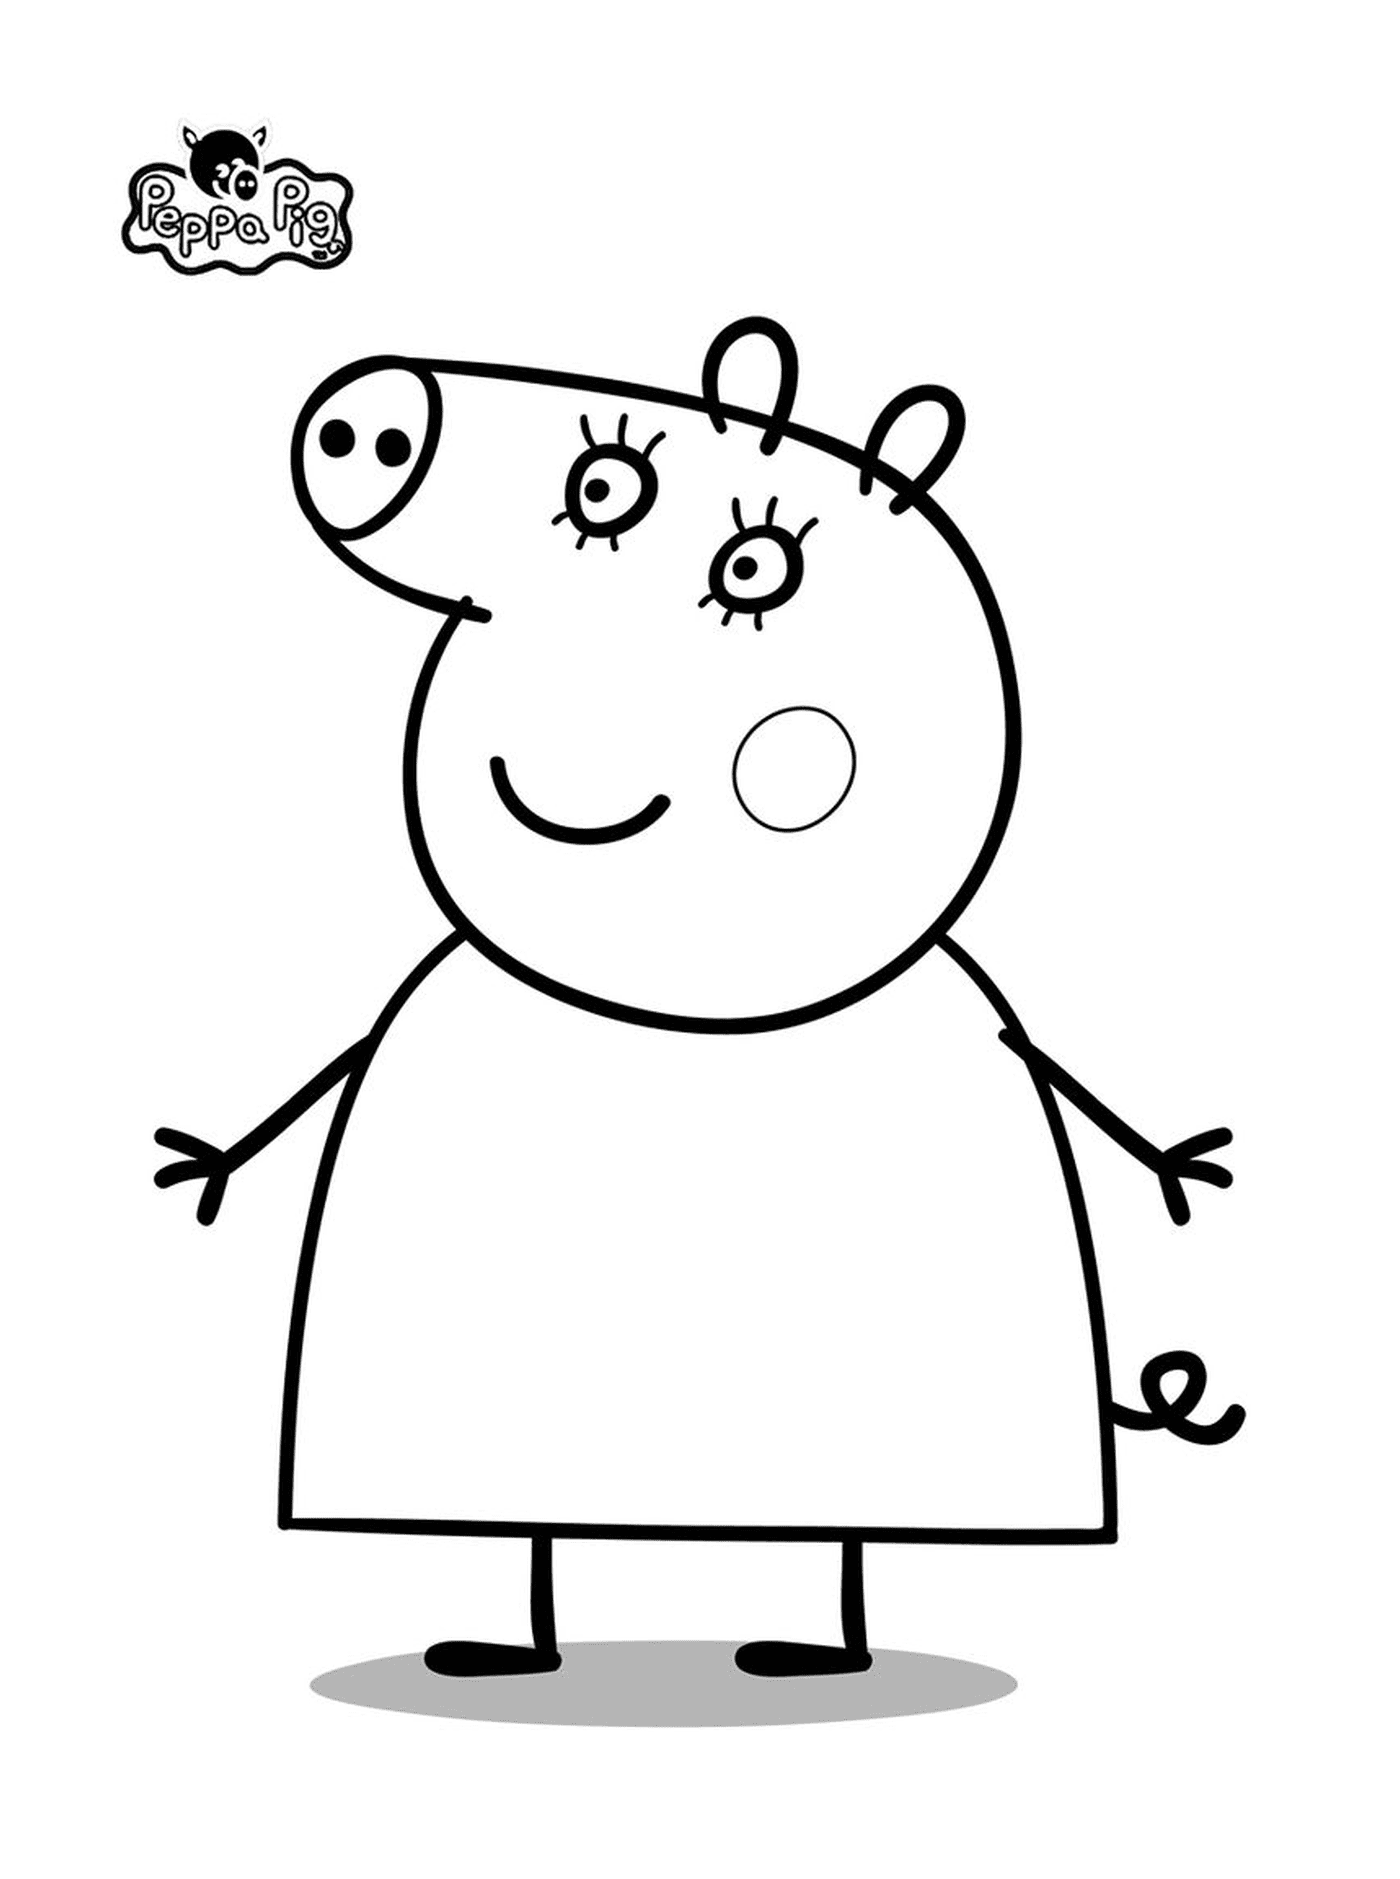  Peppa Pig with closed eyes 